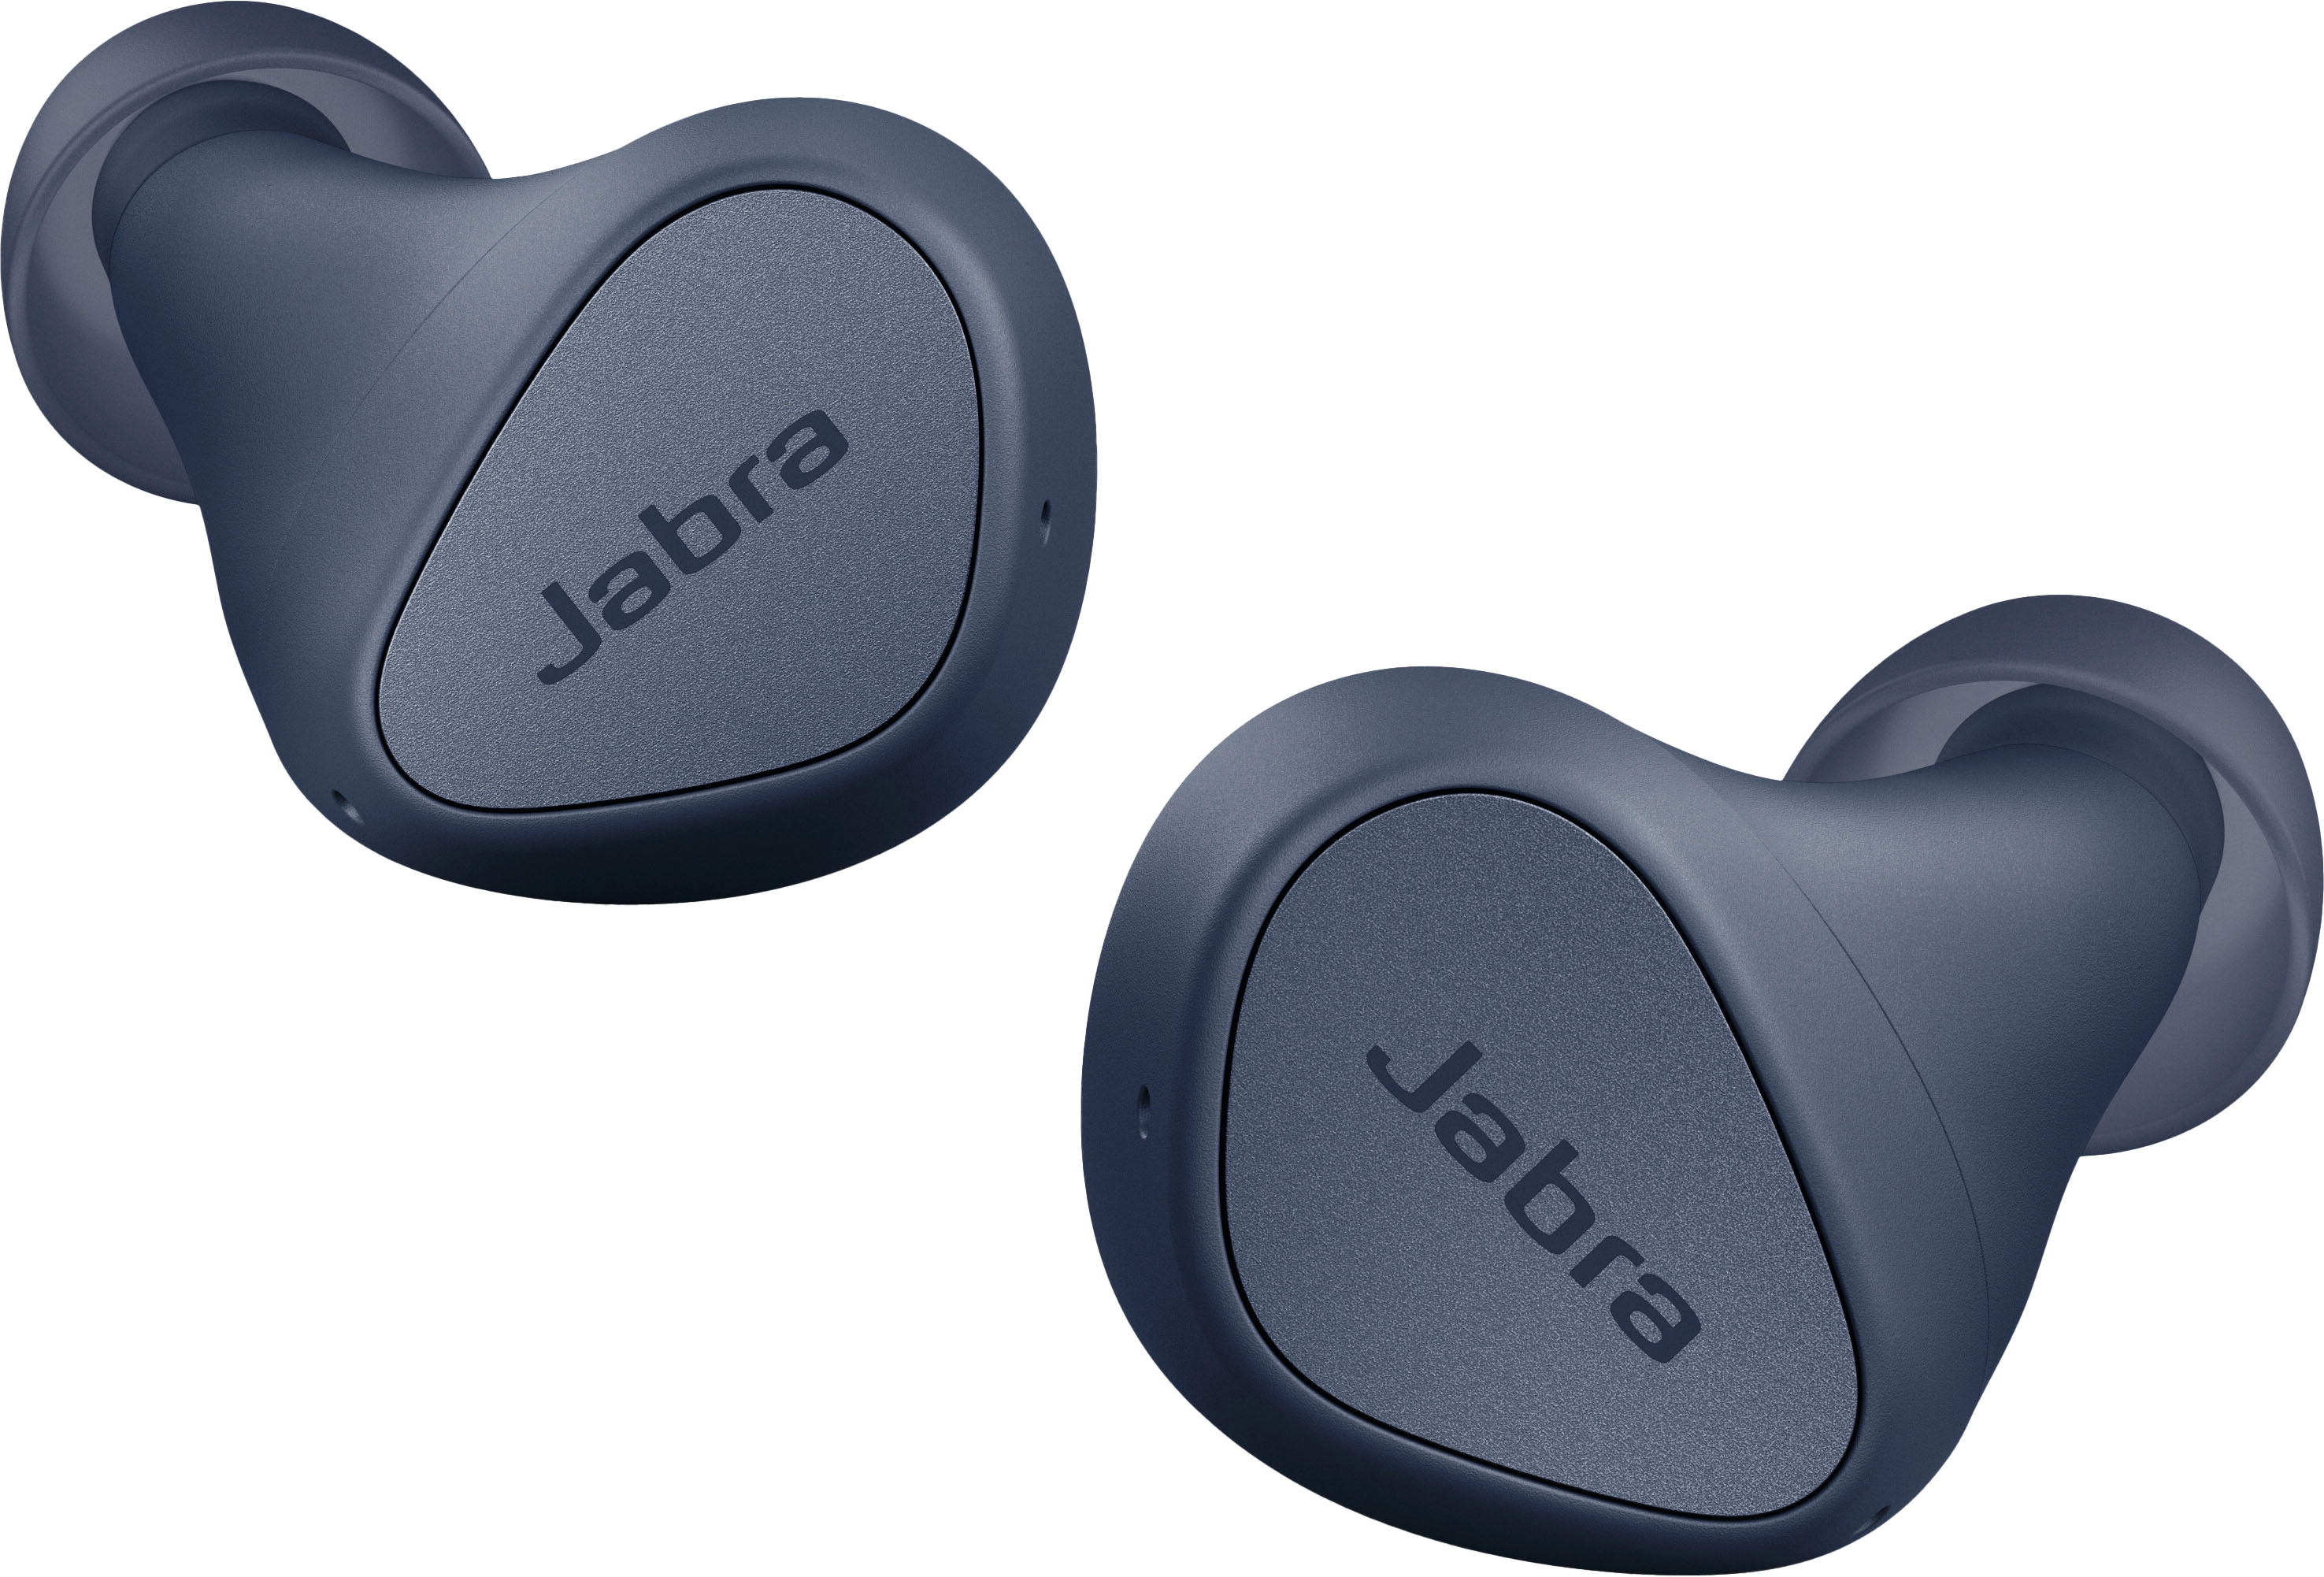 Jabra Elite 4 True Wireless Earbuds - Active Noise Cancelling Headphones -  Discreet & Comfortable Bluetooth Earphones, Laptop, iOS and Android